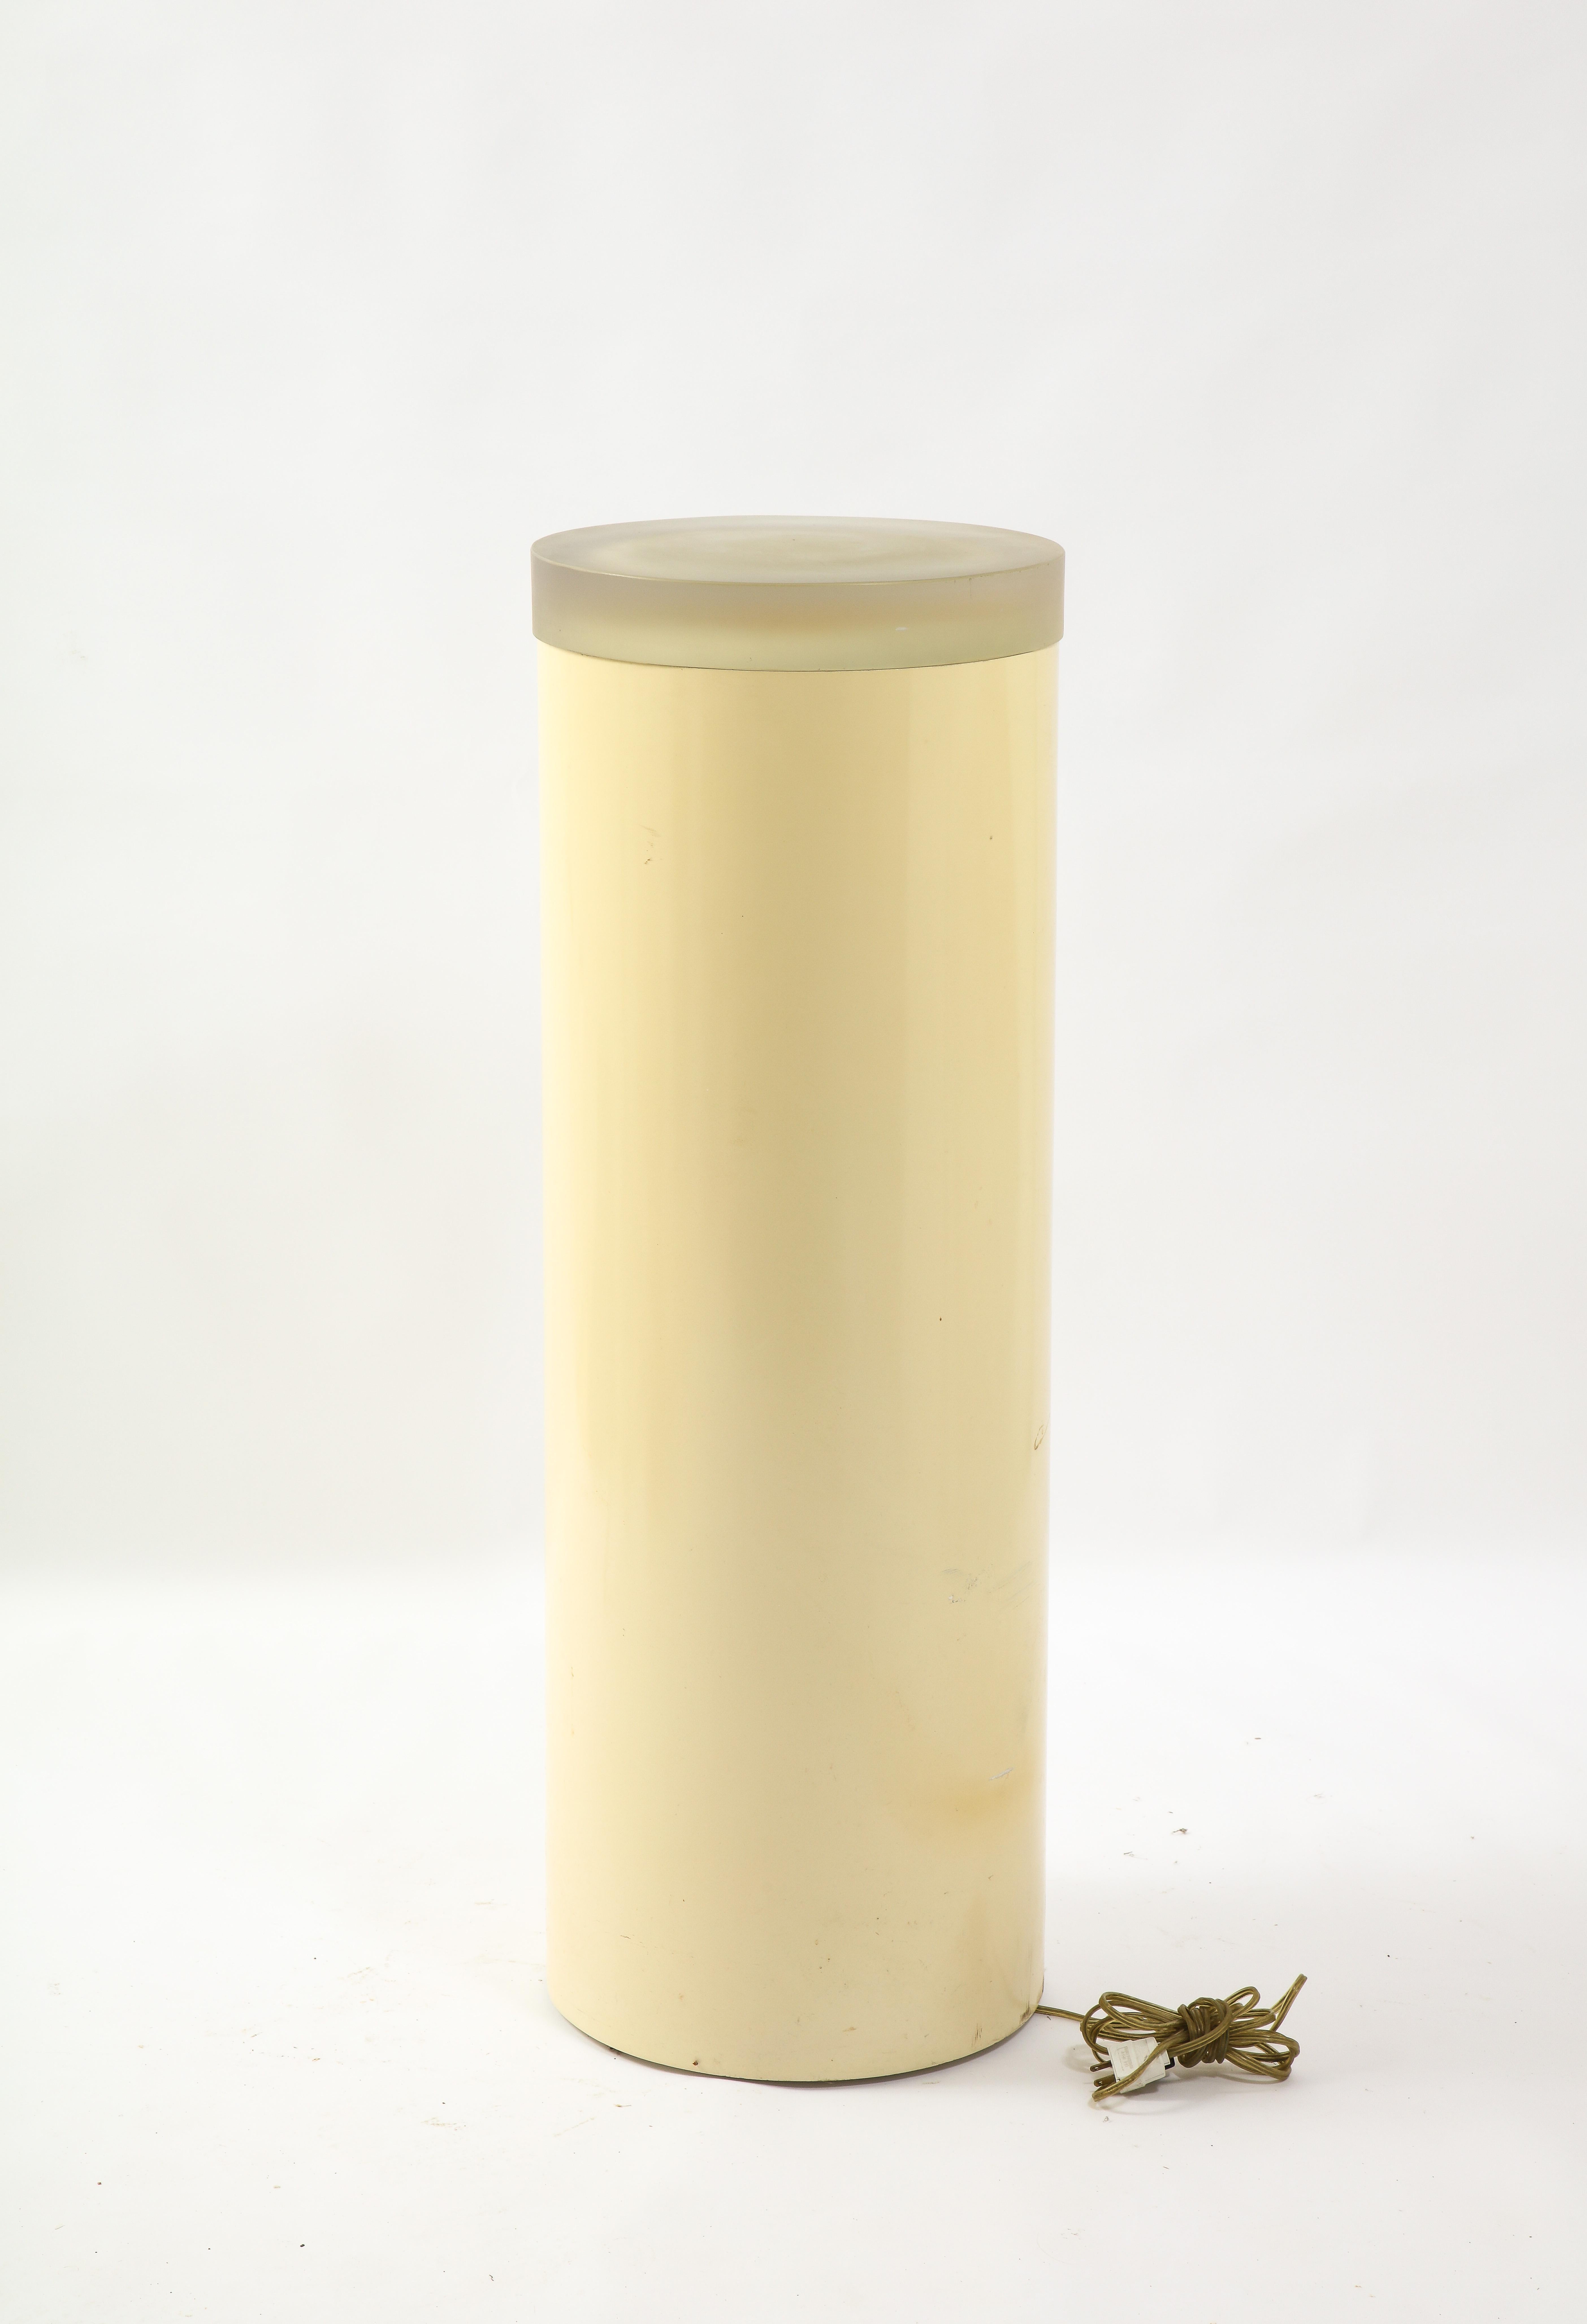 20th Century Cast Resin & Acrylic Lighted Pedestal, USA 1970's For Sale